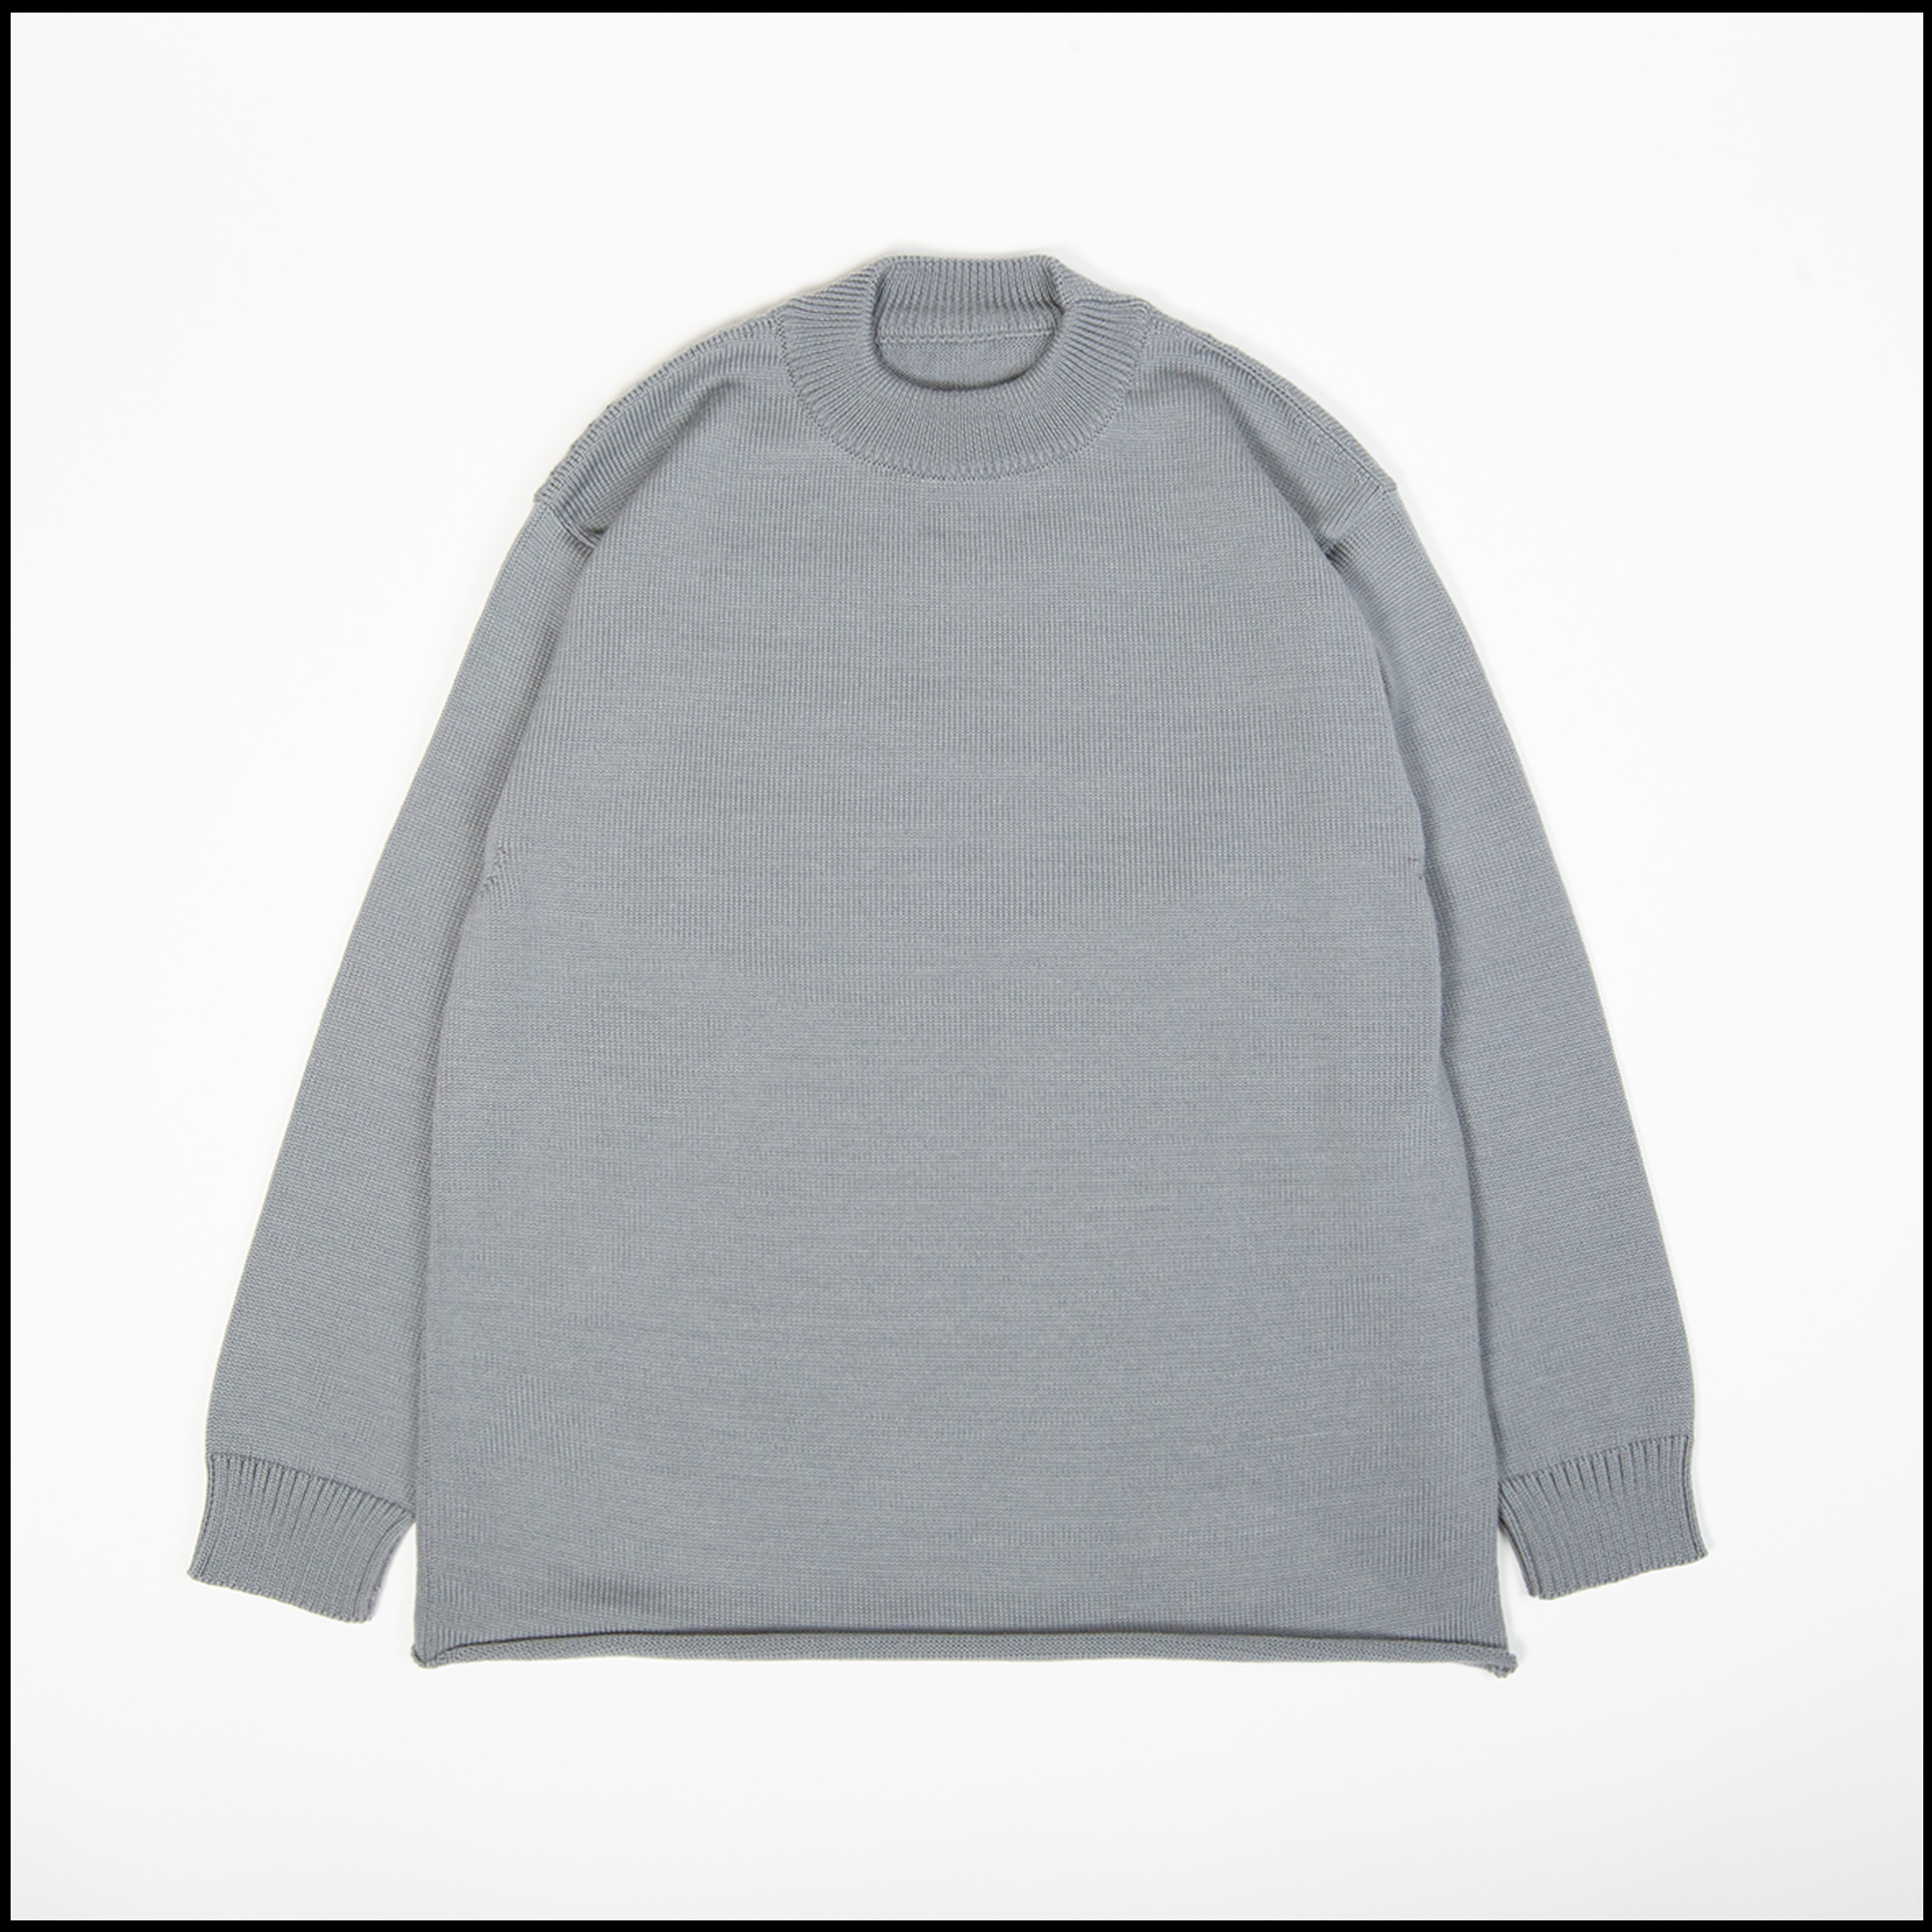 DYCE sweater in Concrete color by Arpenteur